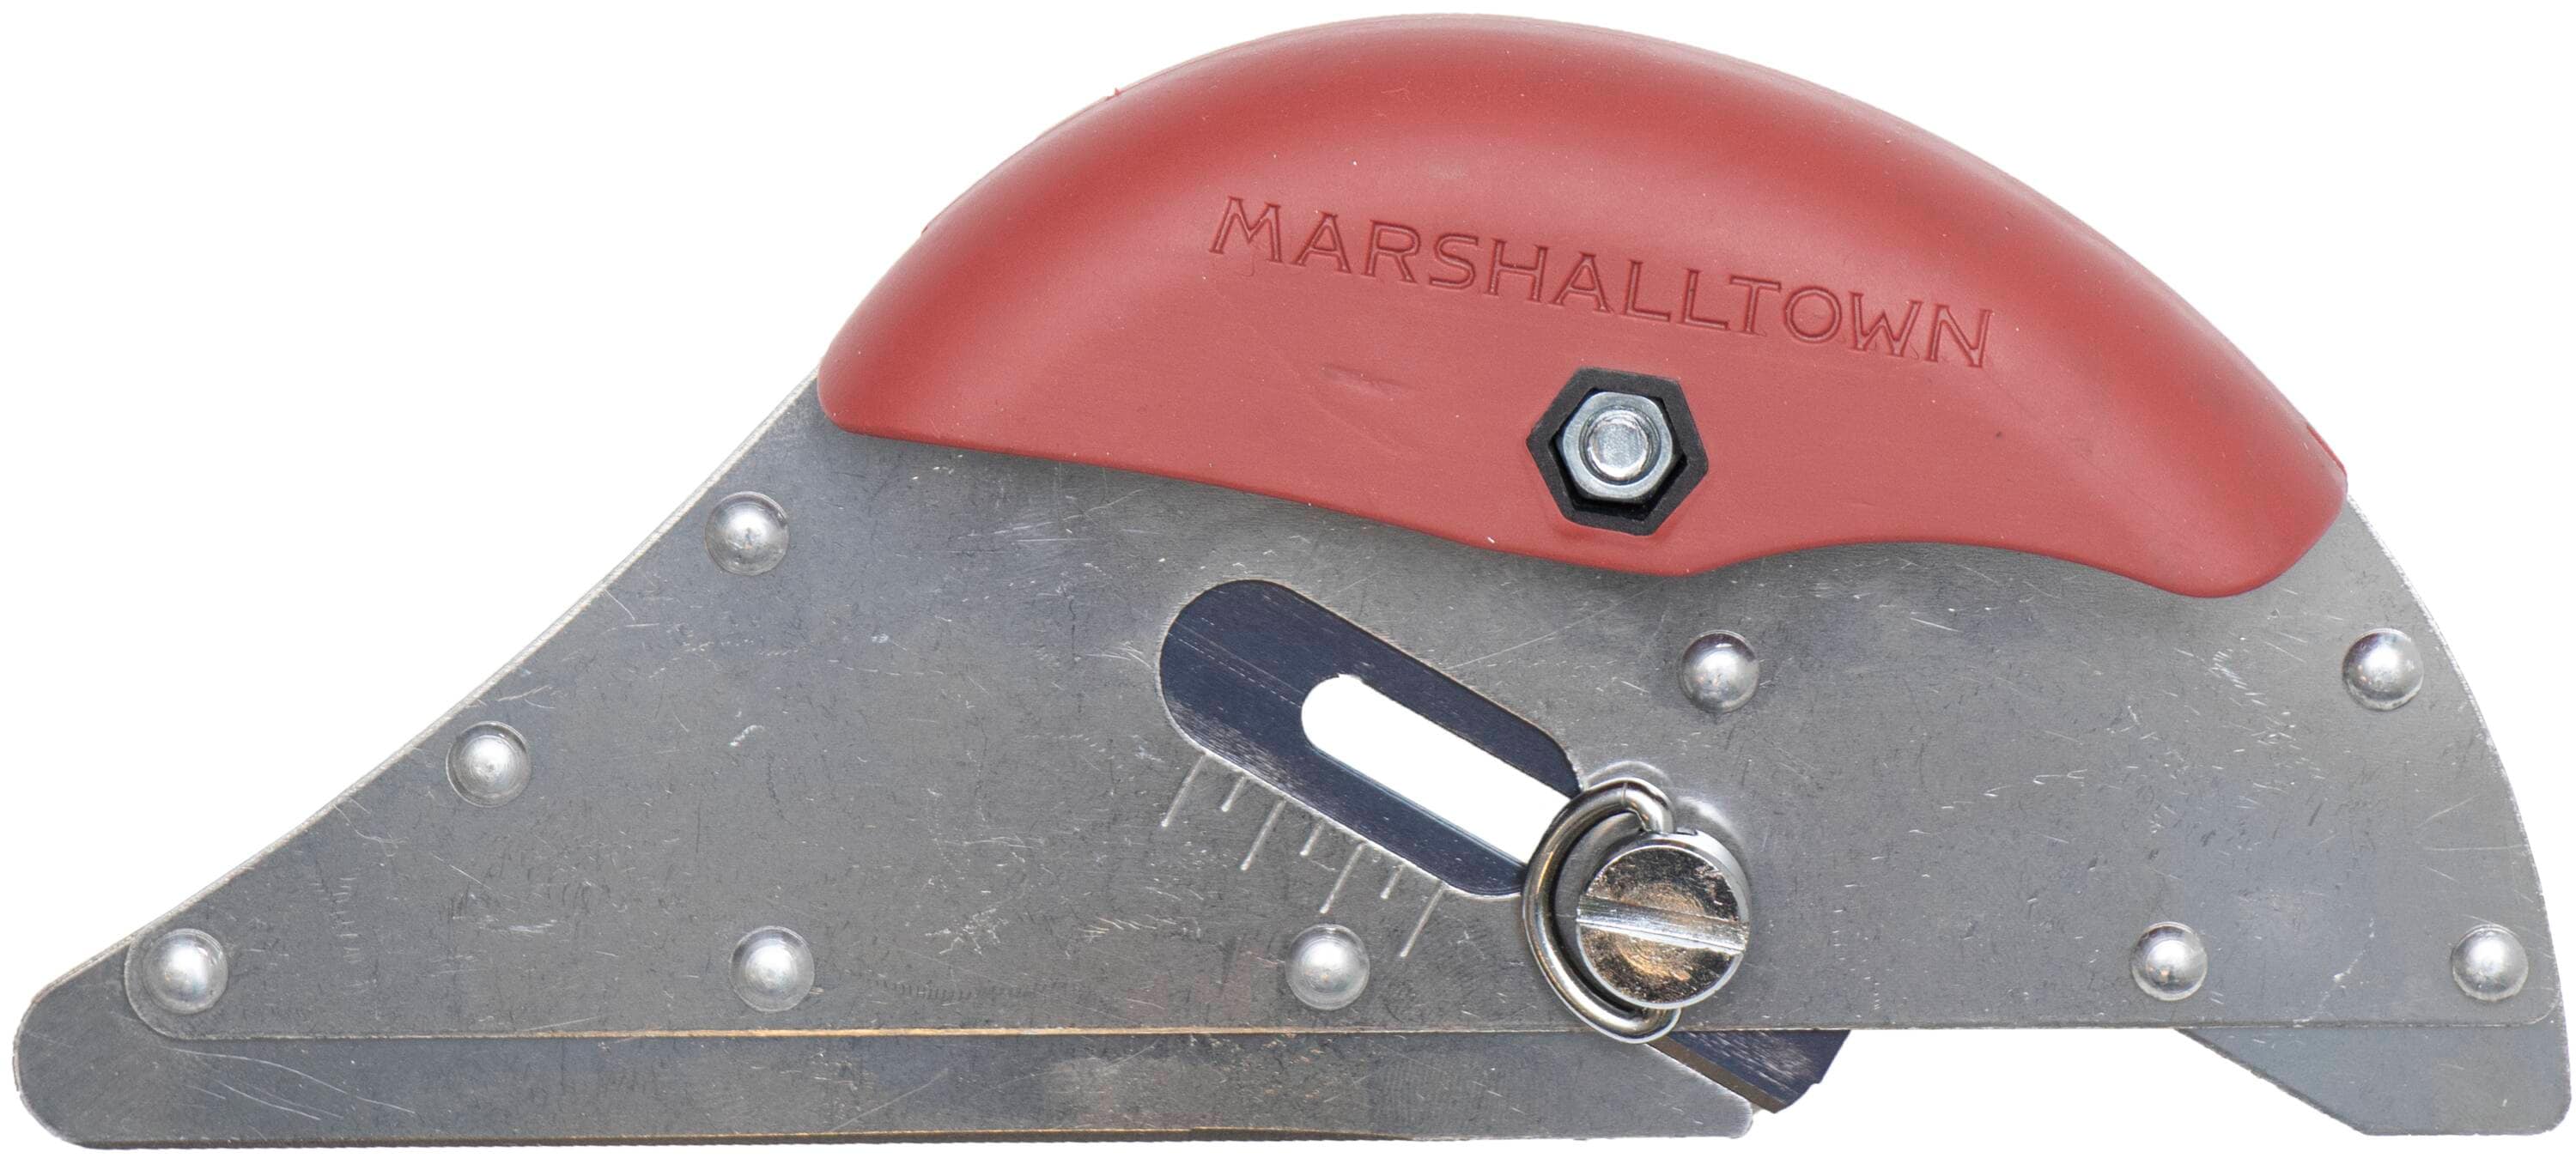 Marshalltown Carpet Cushion back cutter in the Carpet Cutters department at